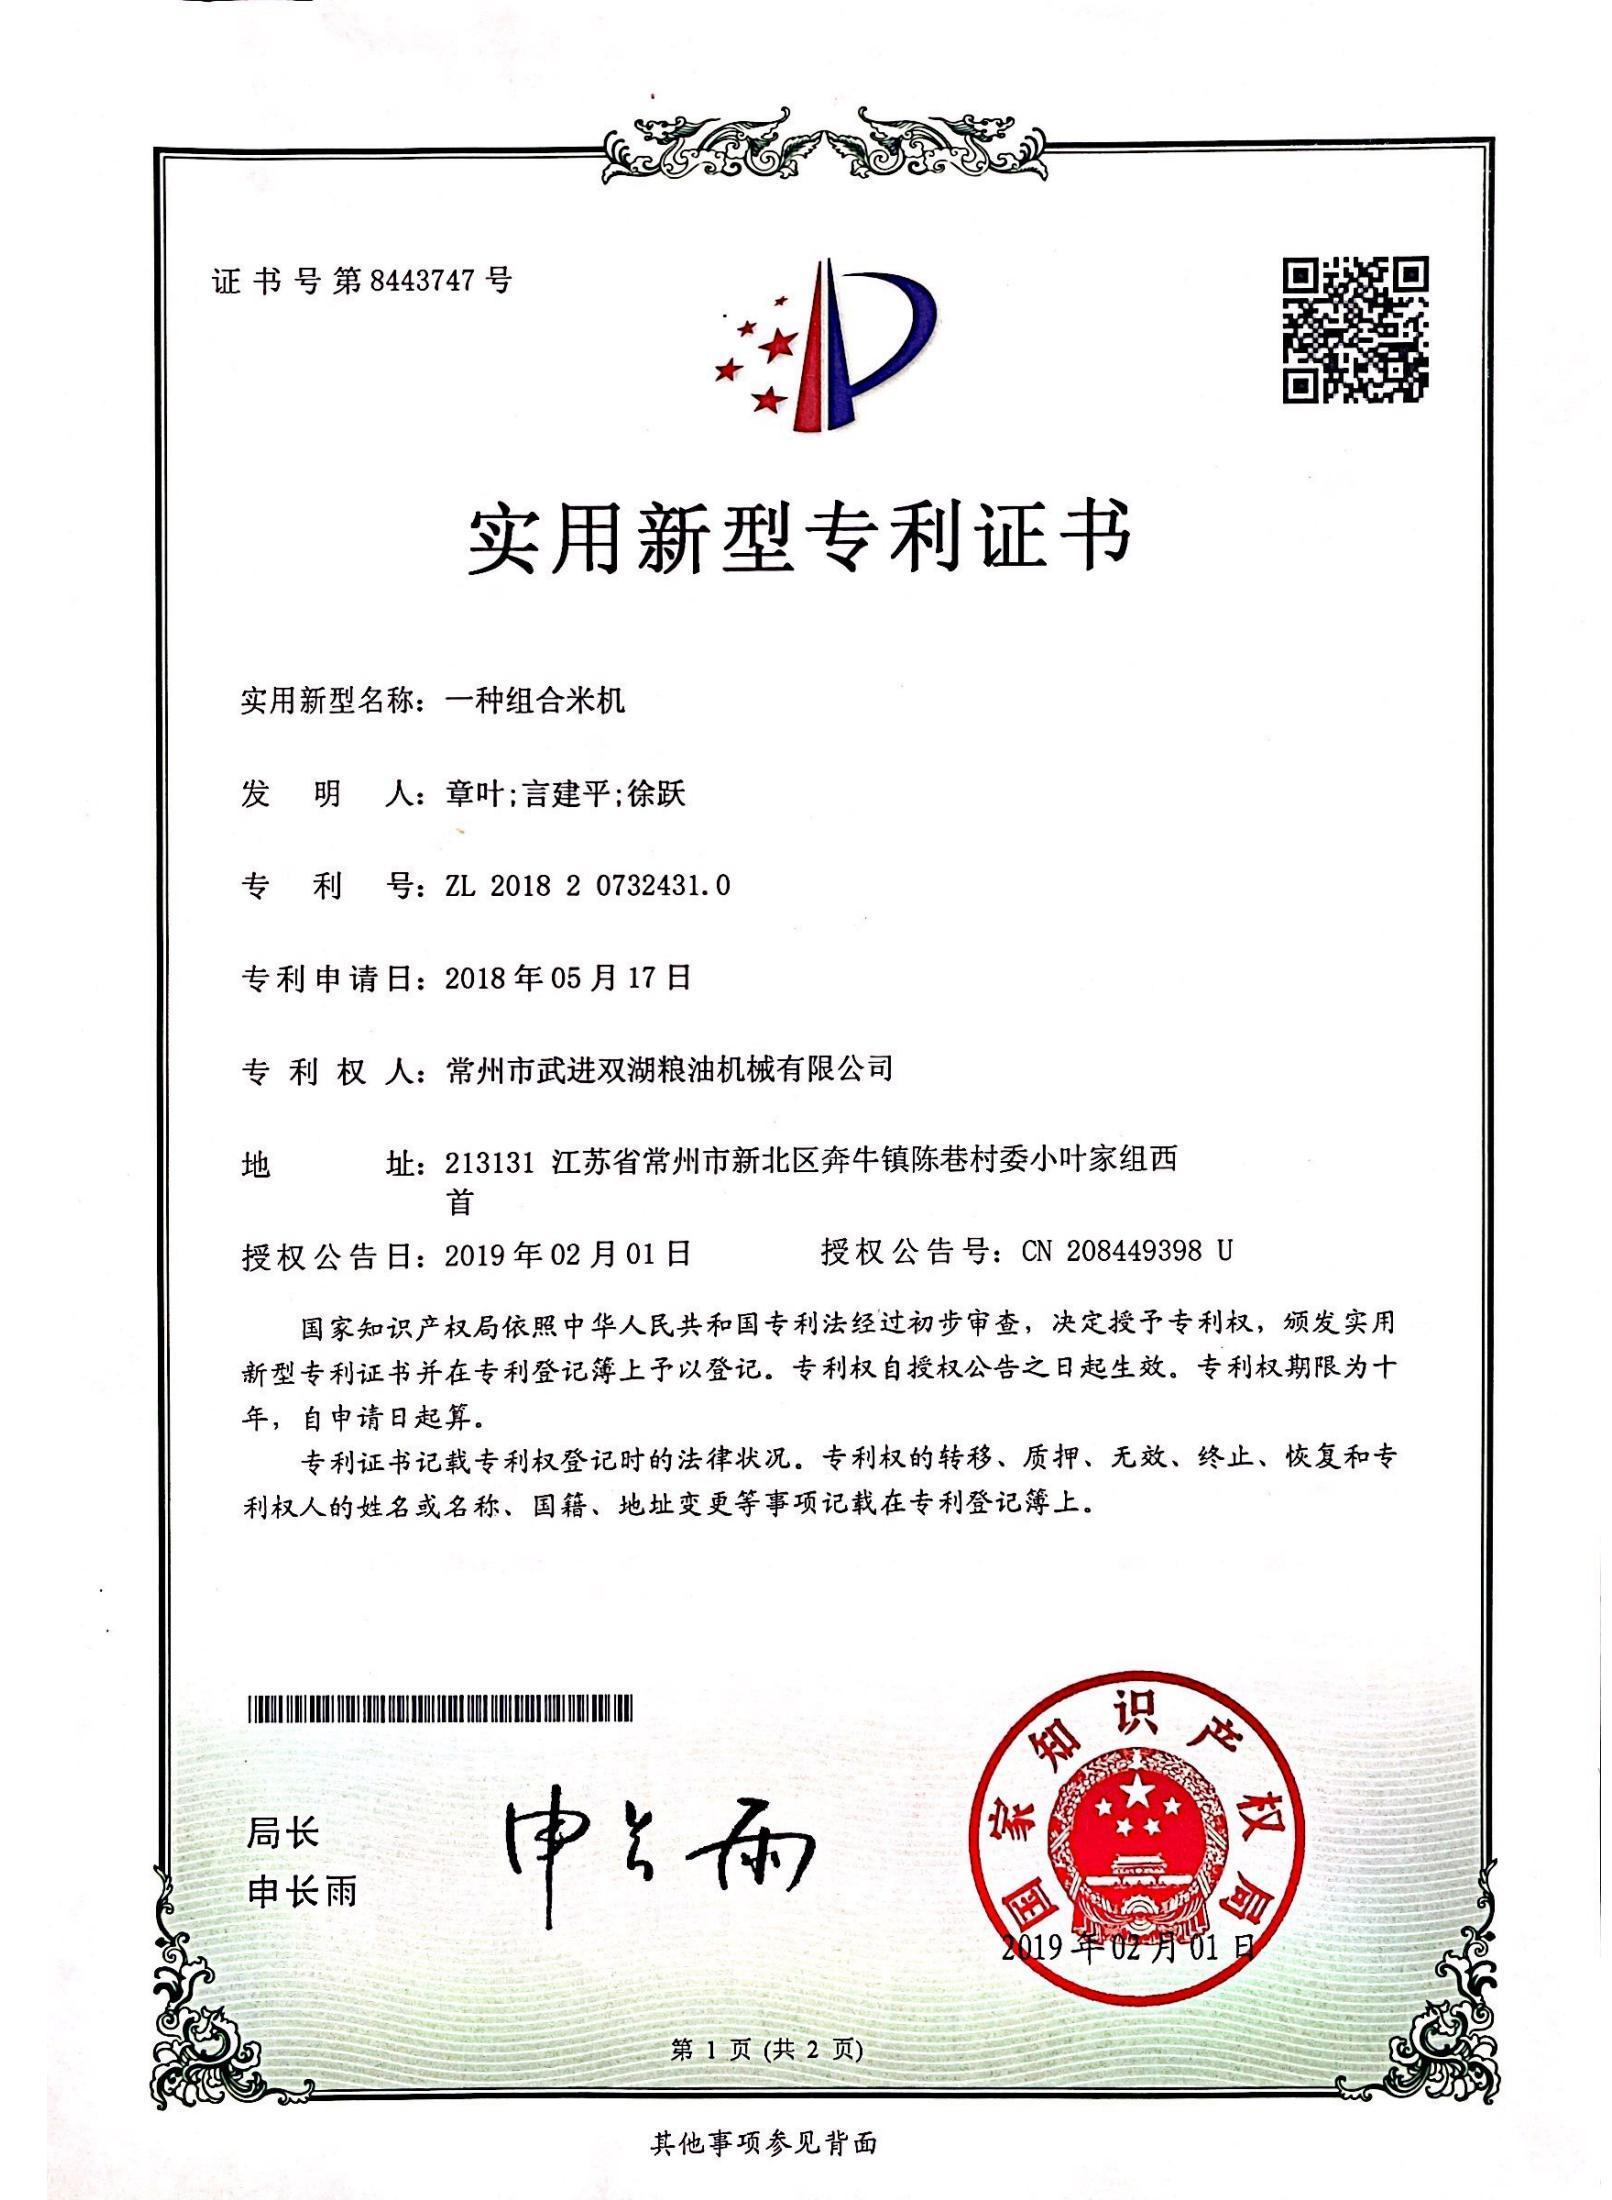 Patent certificate of combined rice milling machine